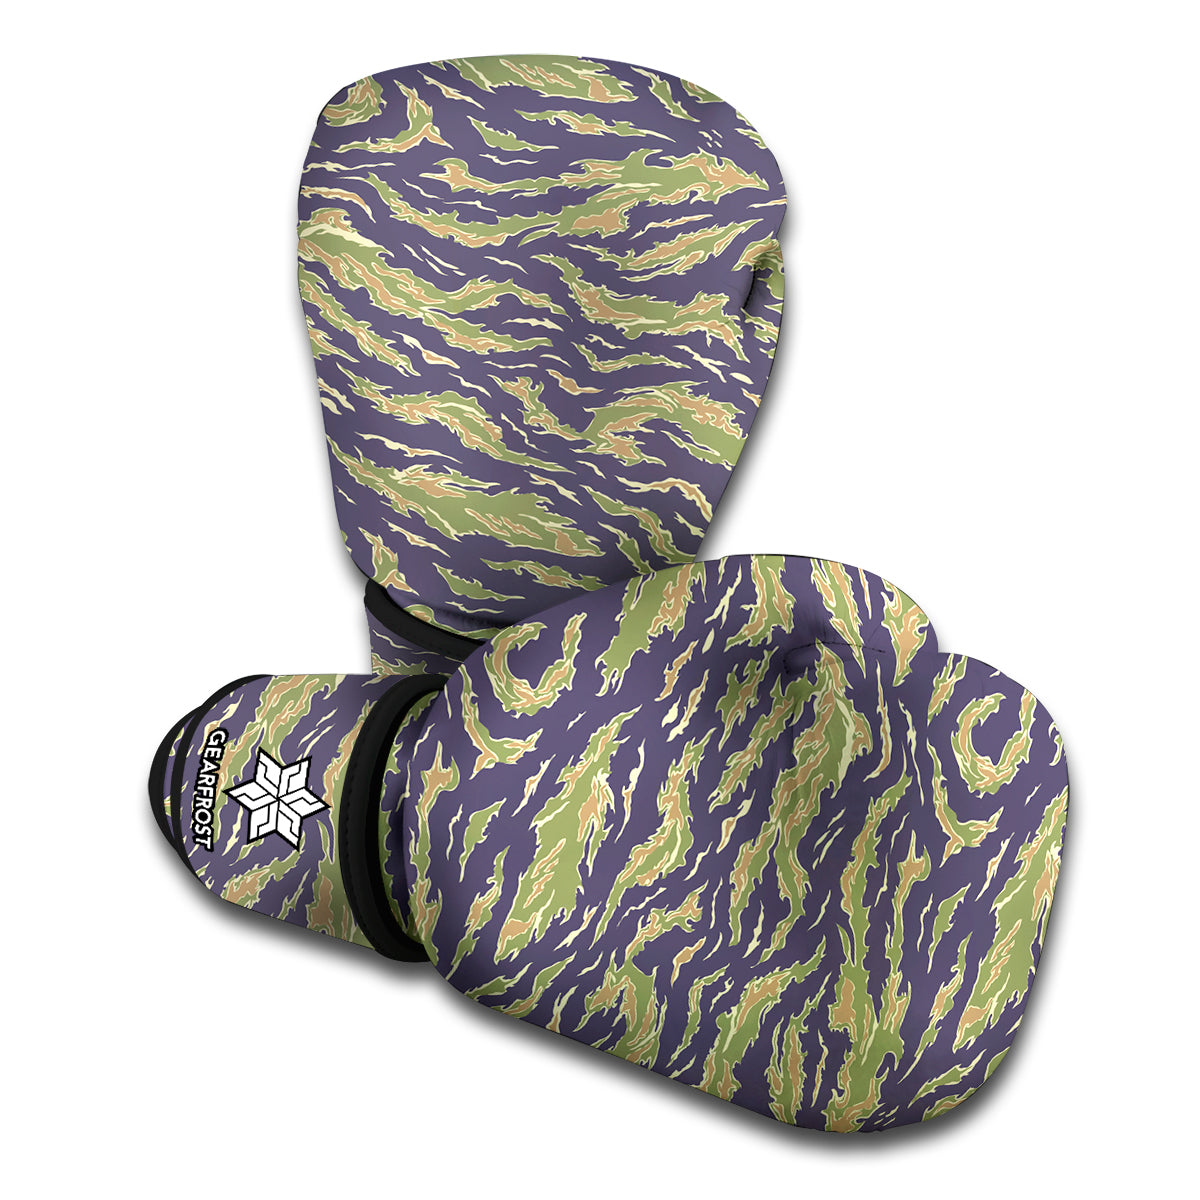 Military Tiger Stripe Camouflage Print Boxing Gloves